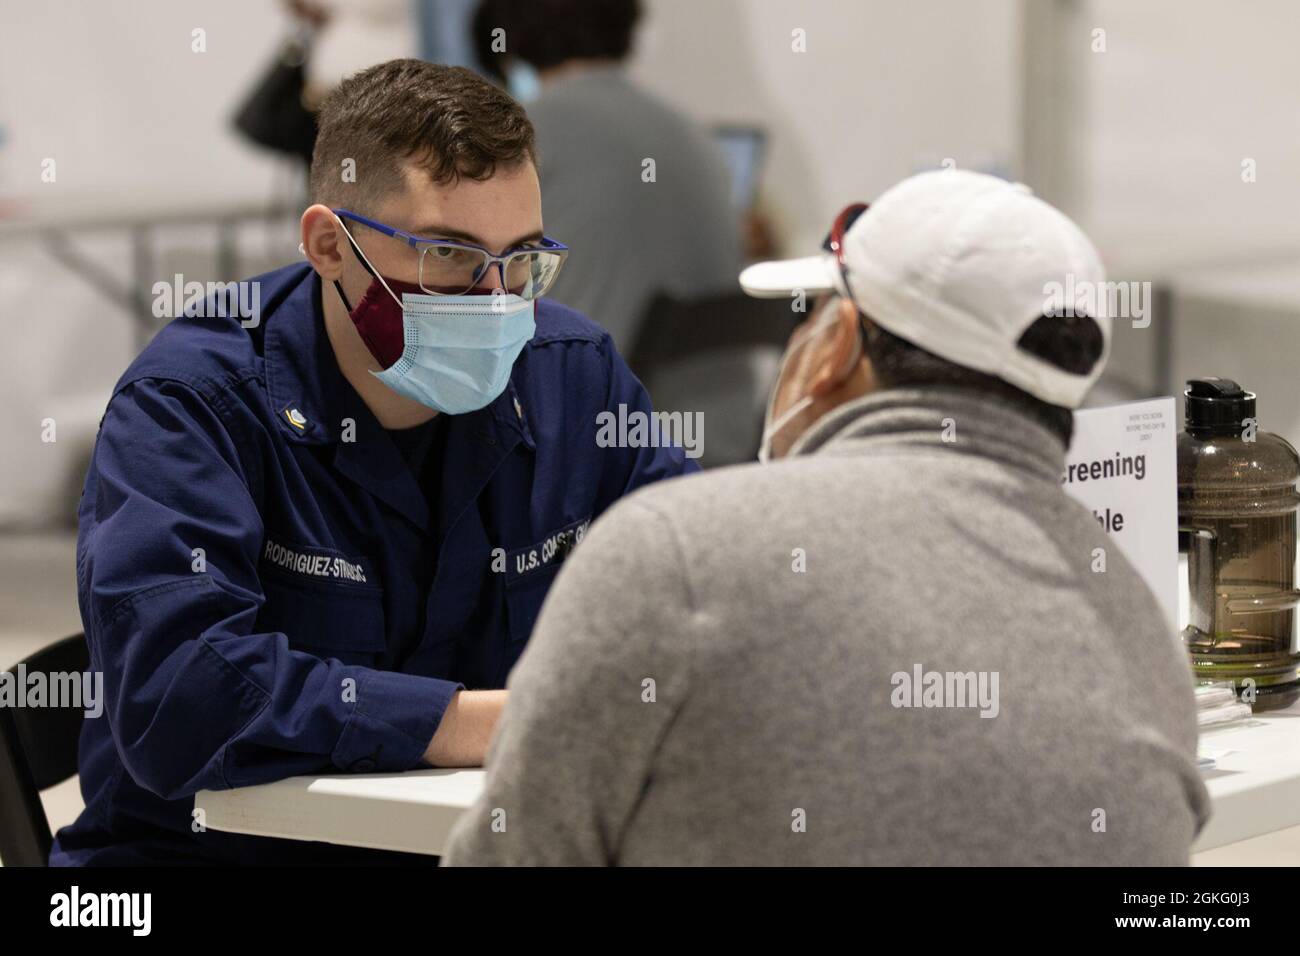 U.S. Coast Guard Petty Officer 3rd Class Alberto Rodriguez-Strazicic, a Mahwah, New Jersey native assigned to the U.S. Coast Guard Sector Virginia, screens a community member at the federally-run pilot Community Vaccination Center in Greenbelt, Maryland, April 13, 2021. U.S. Northern Command, through U.S. Army North, remains committed to providing continued, flexible Department of Defense support to the Federal Emergency Management Agency as part of the whole-of-government response to COVID-19. Stock Photo